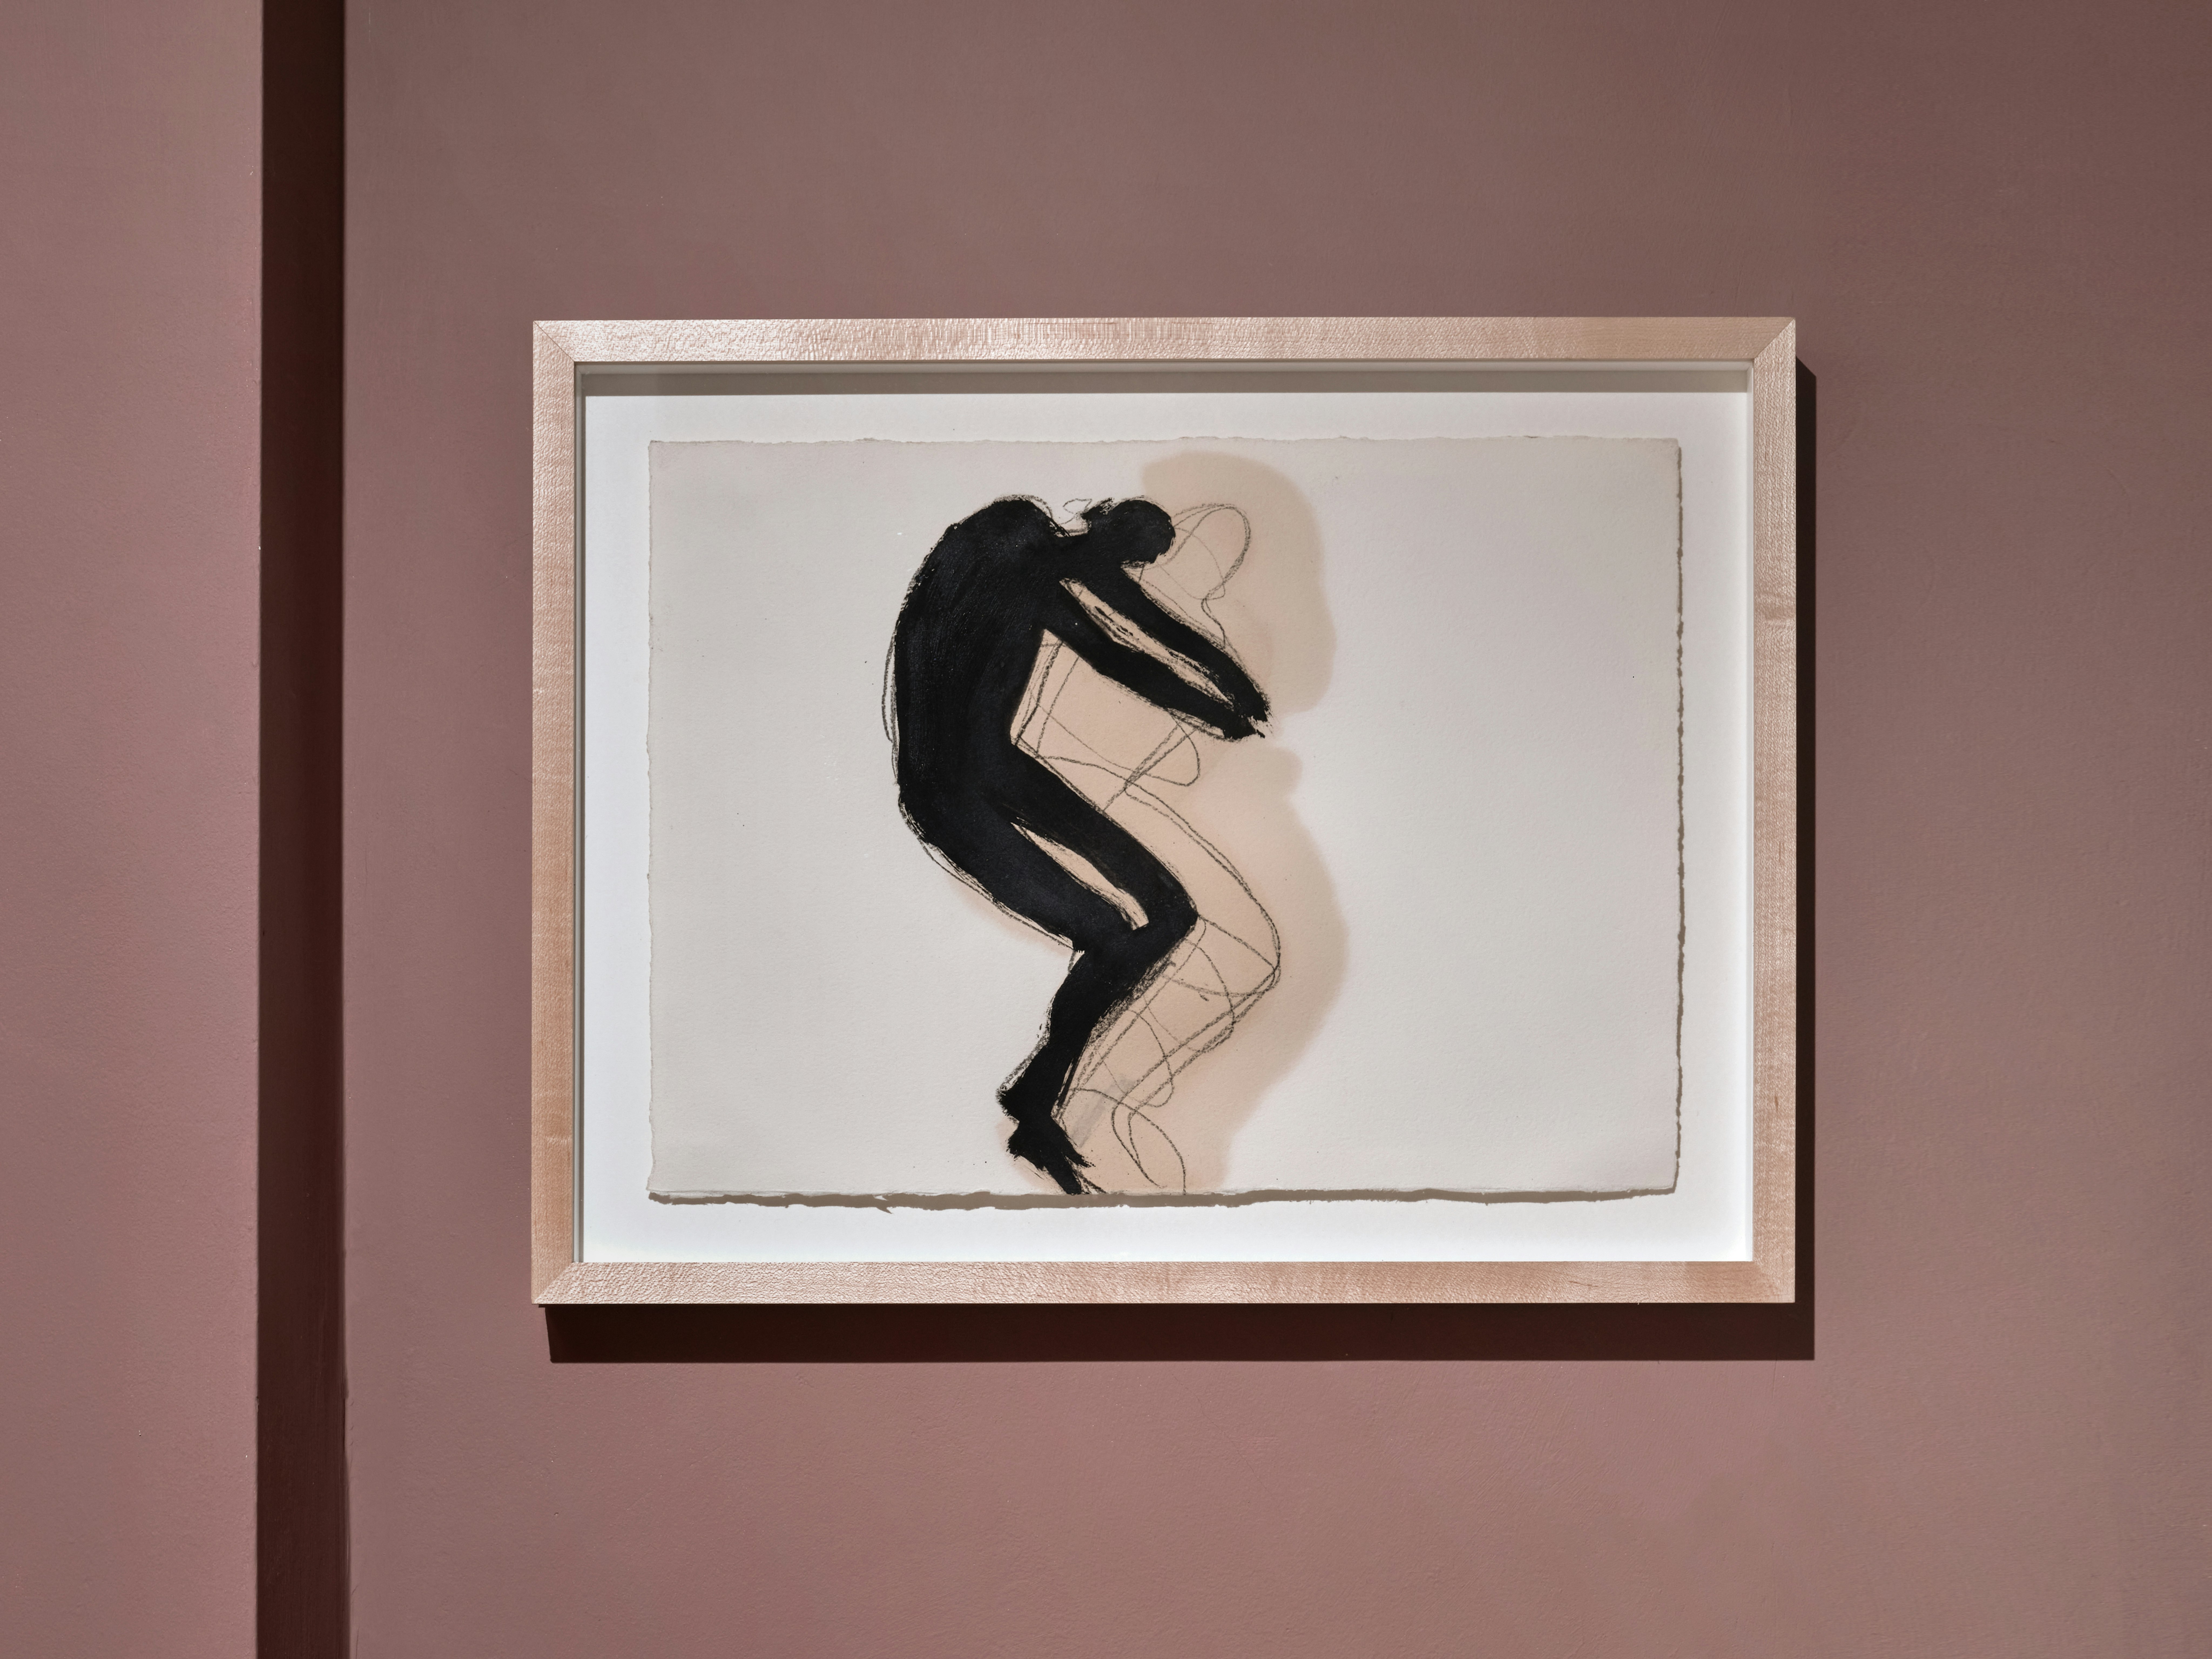 Installation photo of framed drawing by Antony Gormley made with black pigment, linseed oil & charcoal depicting figure of man laying sideways and their shadow